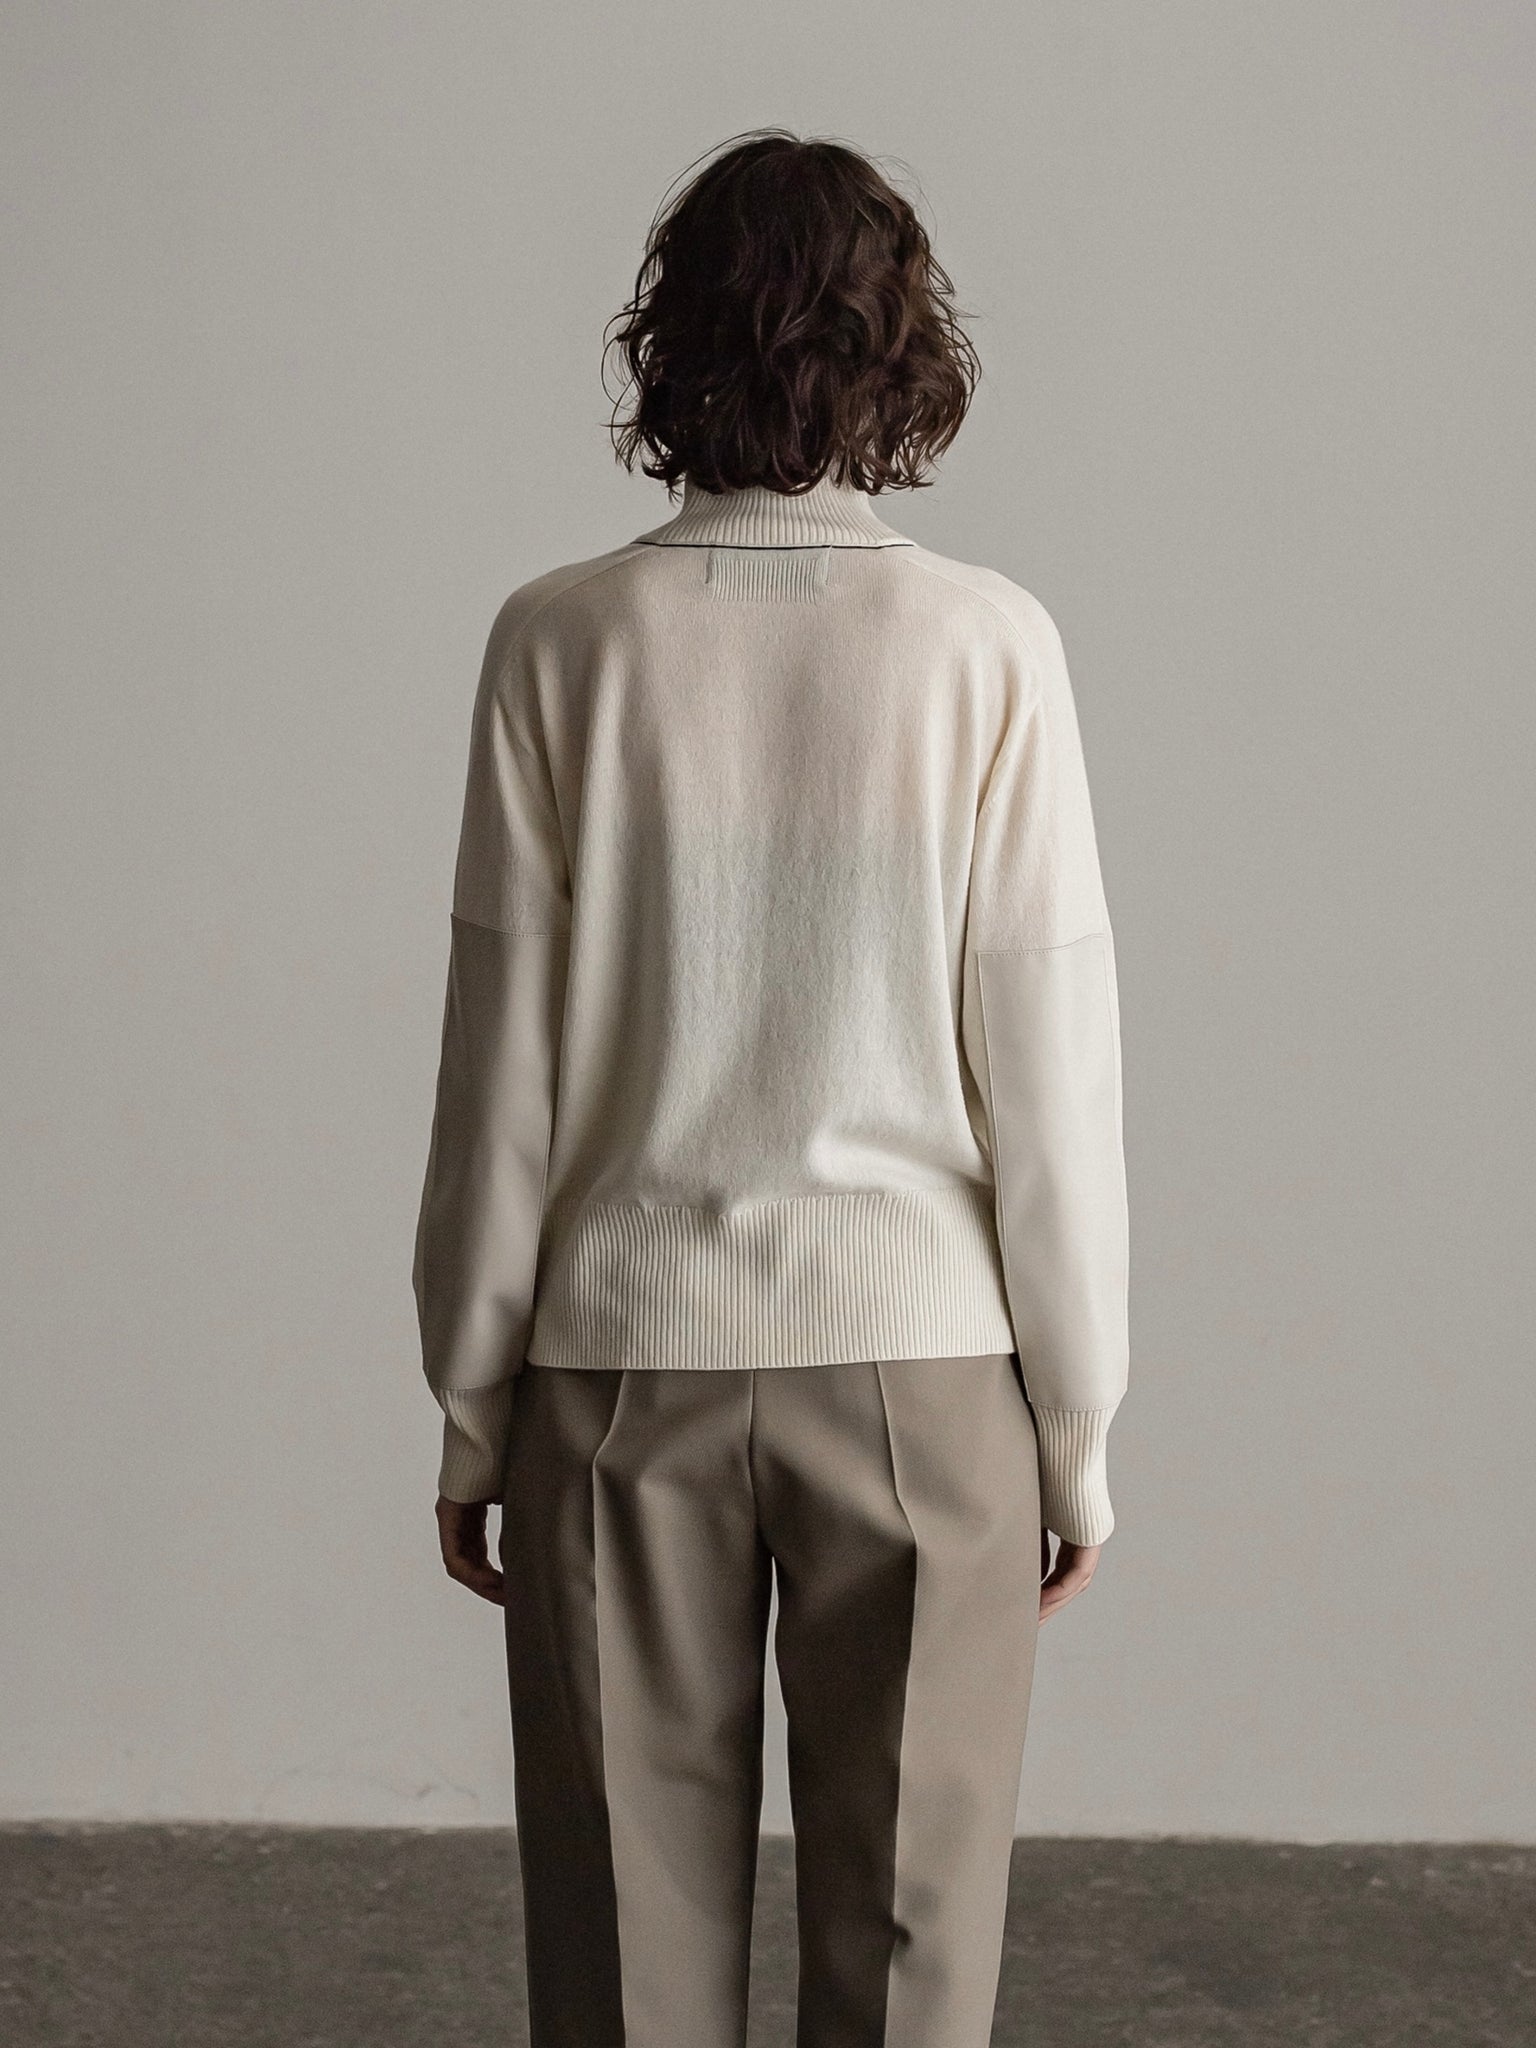 IH12-23AW-92802  Elbow patch turtleneck sweater